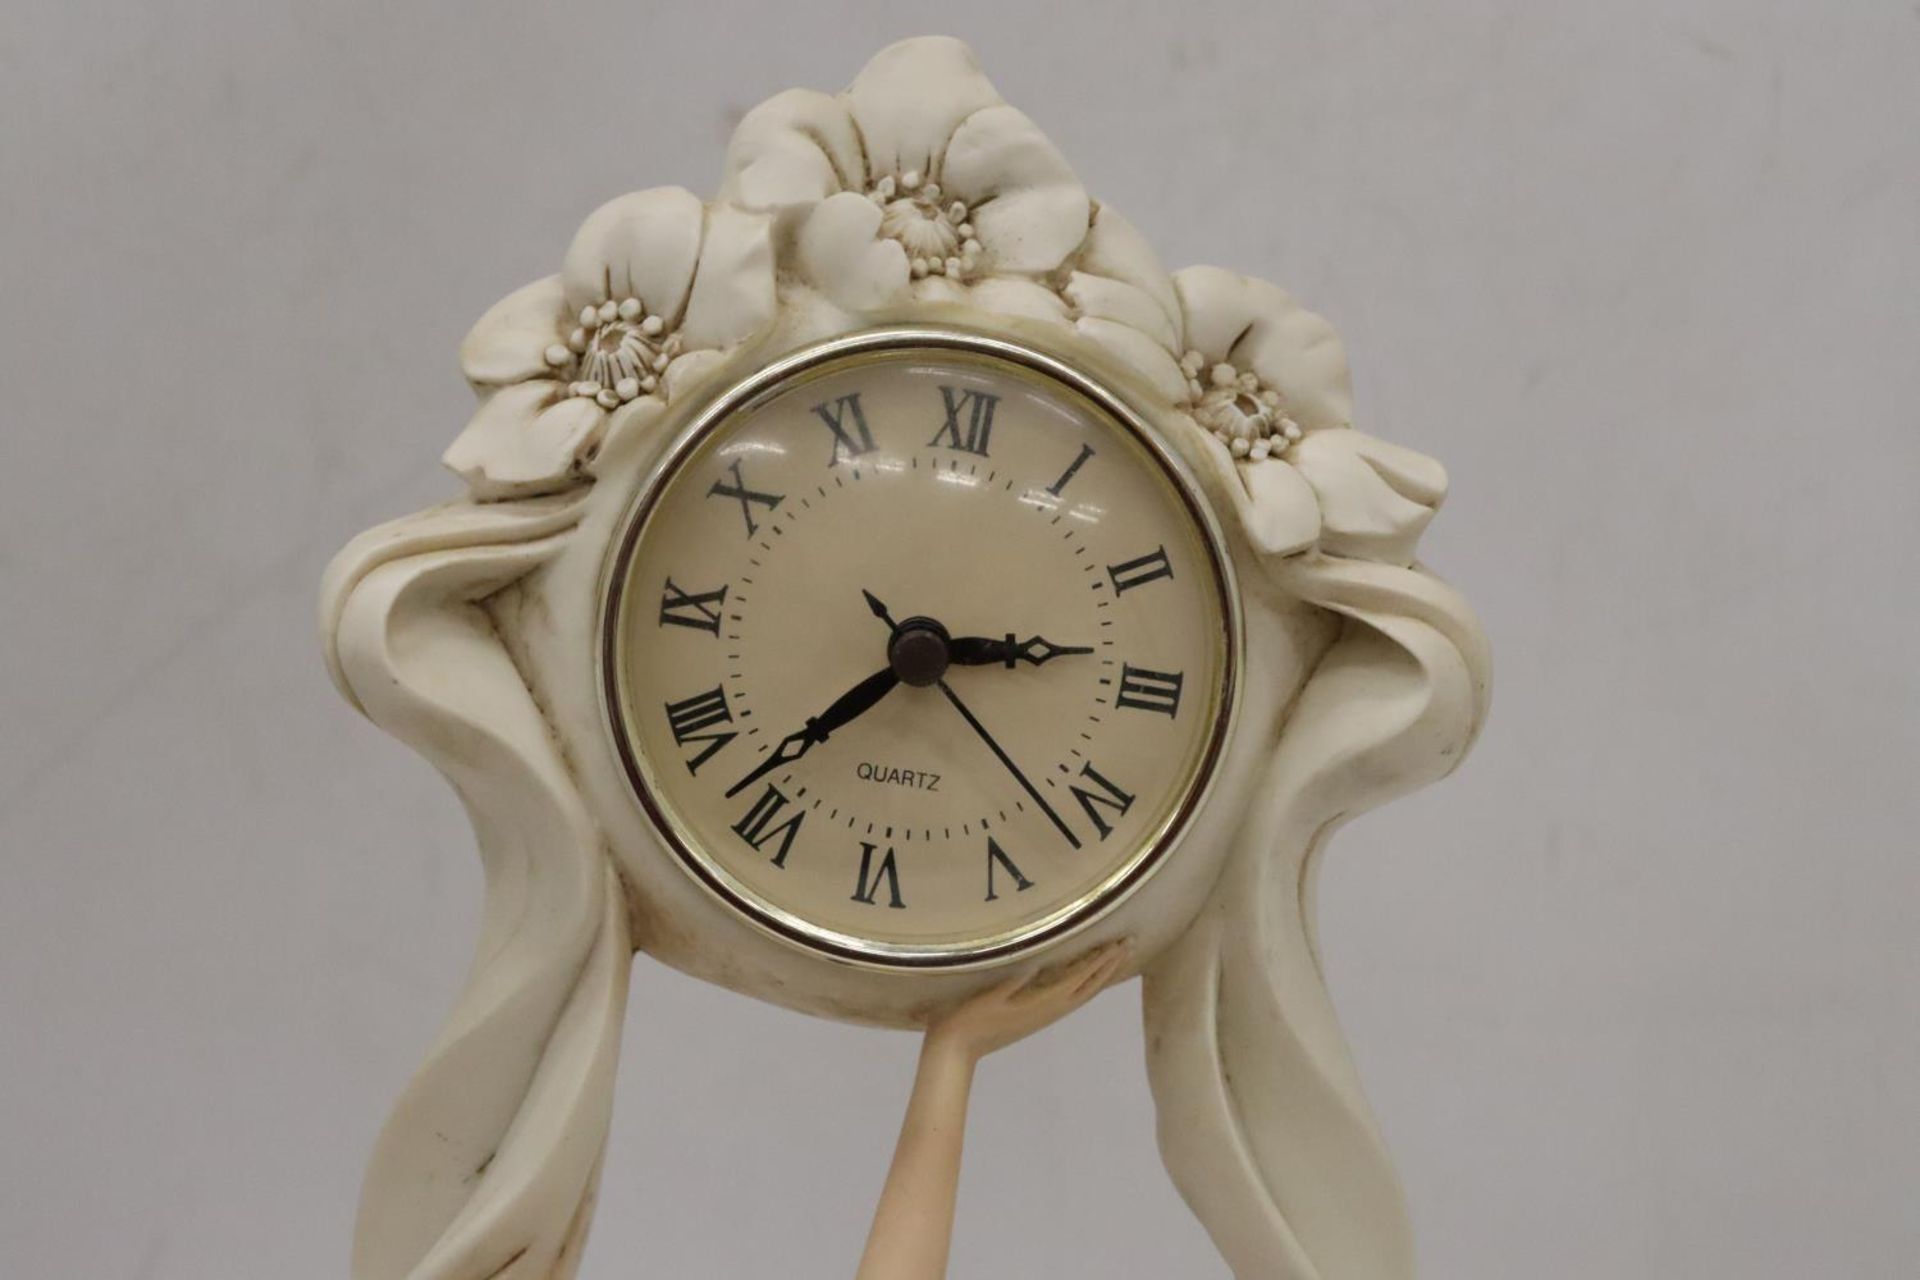 AN ART DECO STYLE MANTLE CLOCK WITH A LADY FIGURINE, HEIGHT 36CM - Image 6 of 7